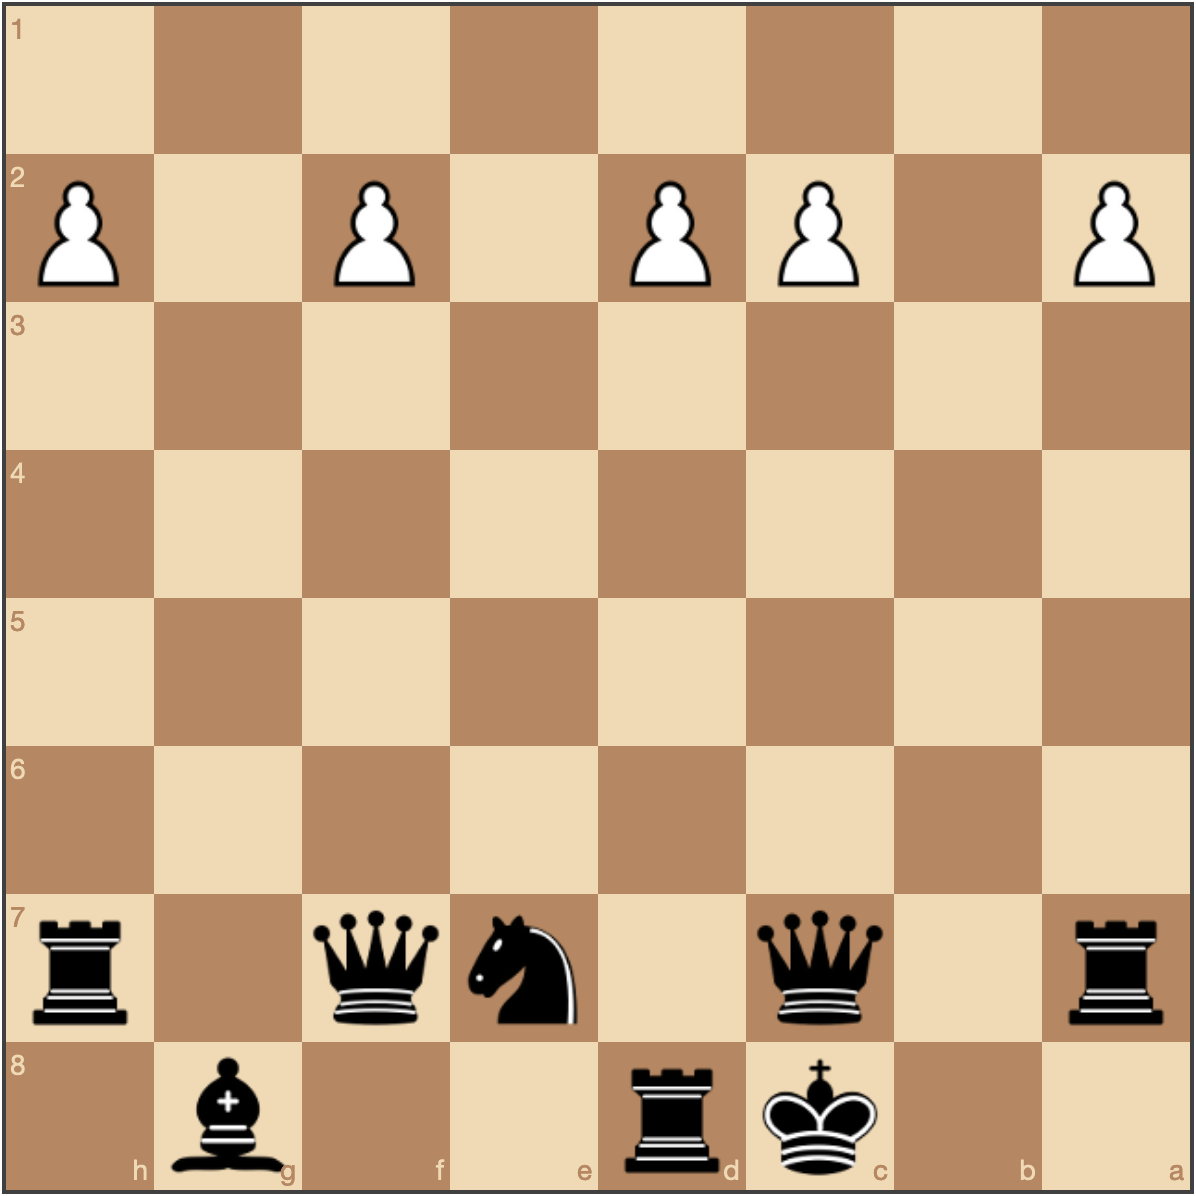 Partial view of chess board from black player’s perspective